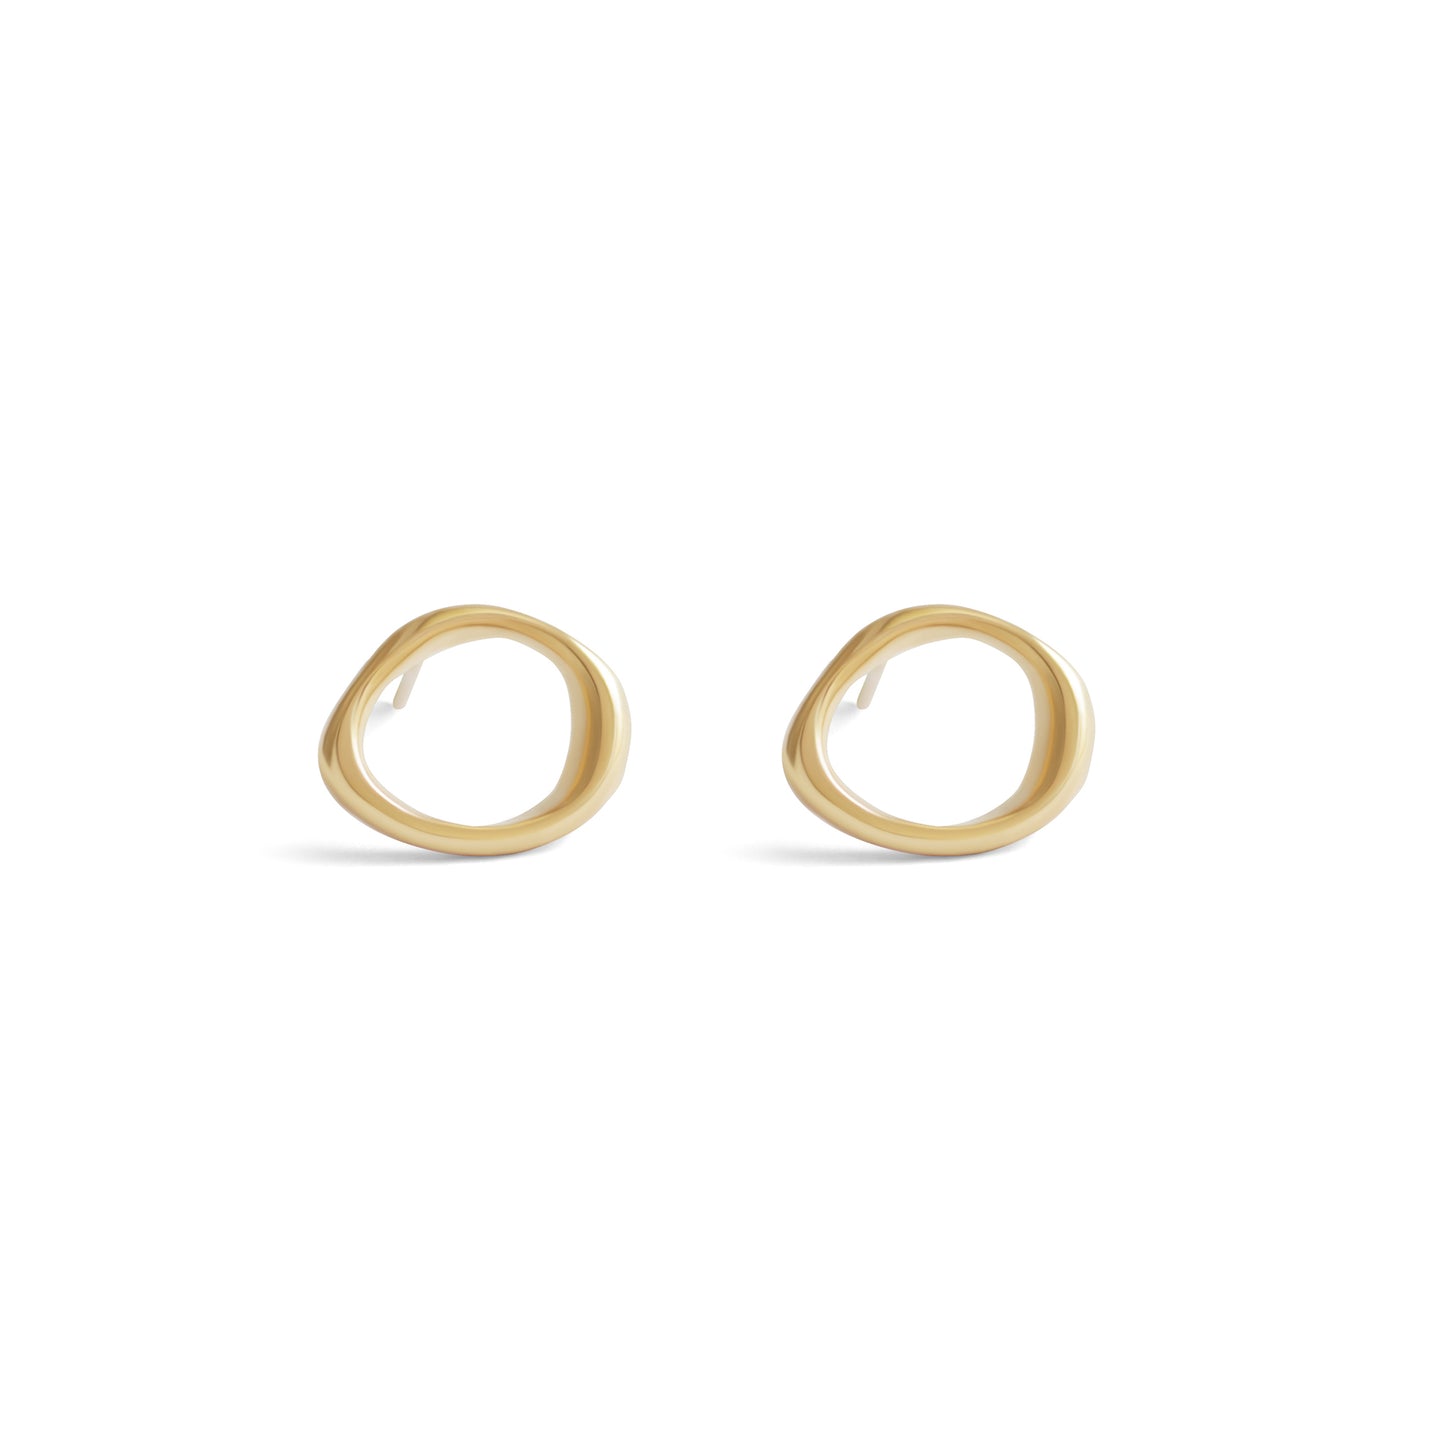 Two Amorphous Earring / Small Circle creating a pair